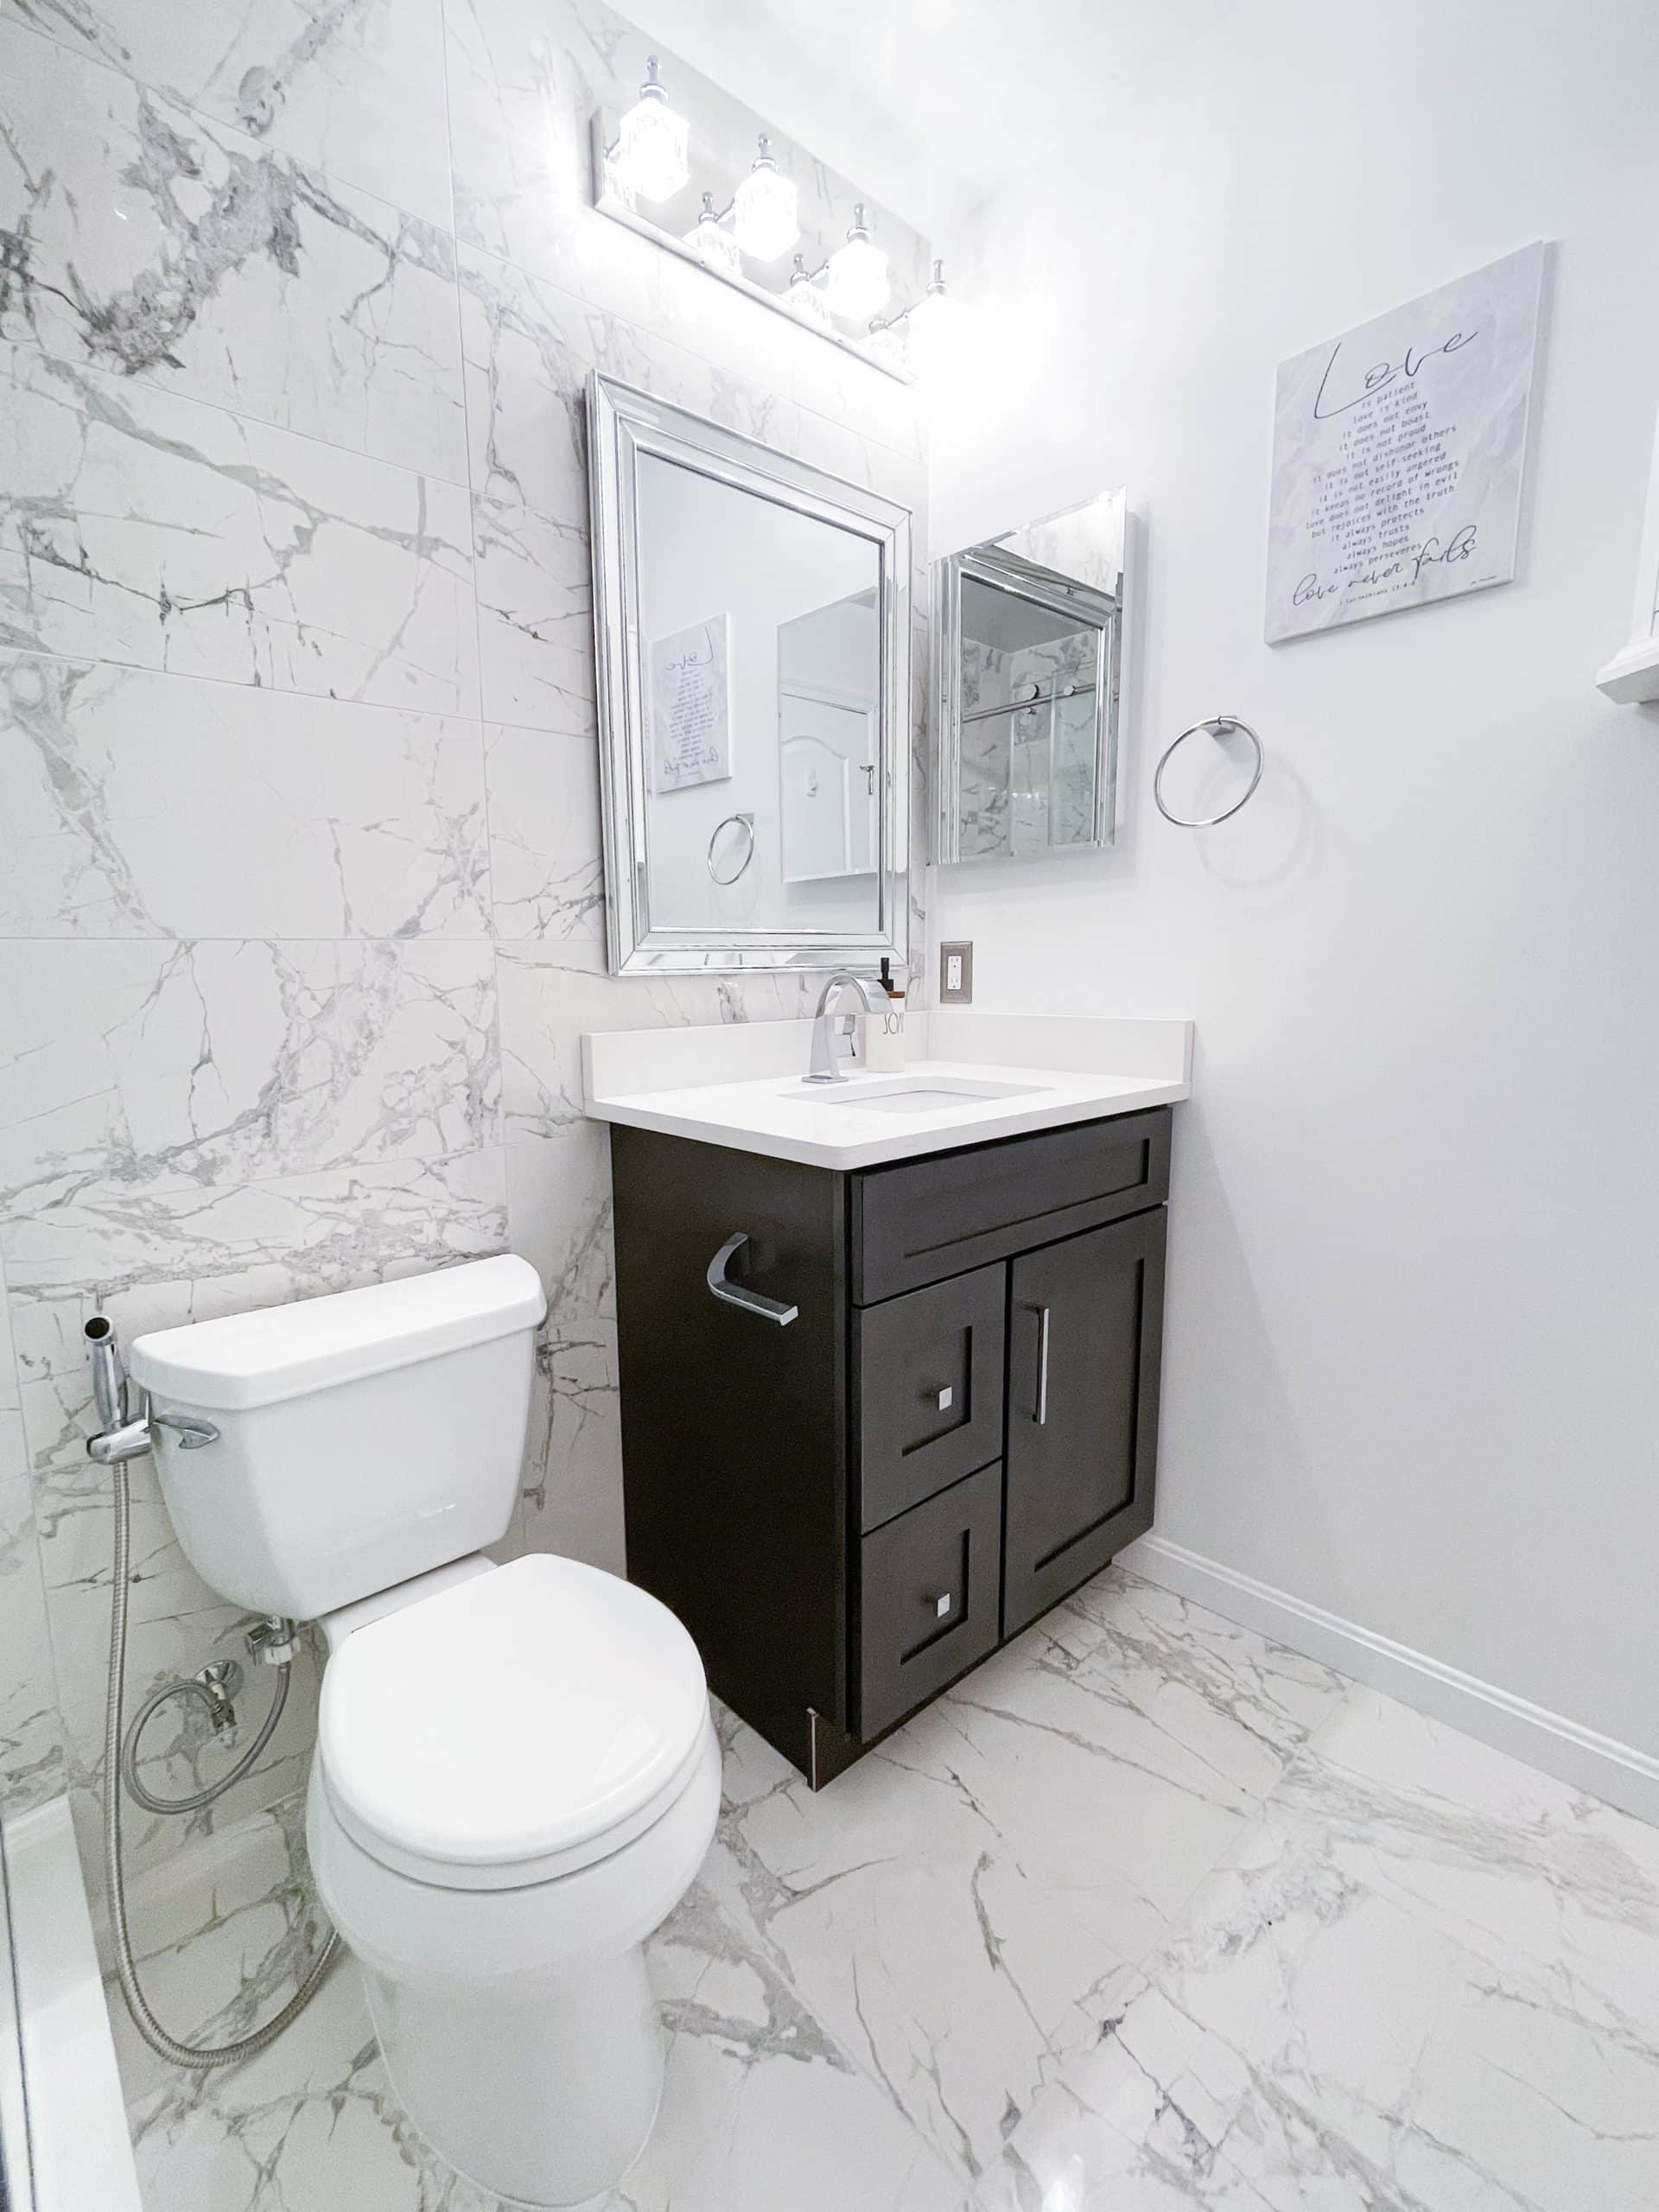 White bathroom style with brown vanity, and a toilet